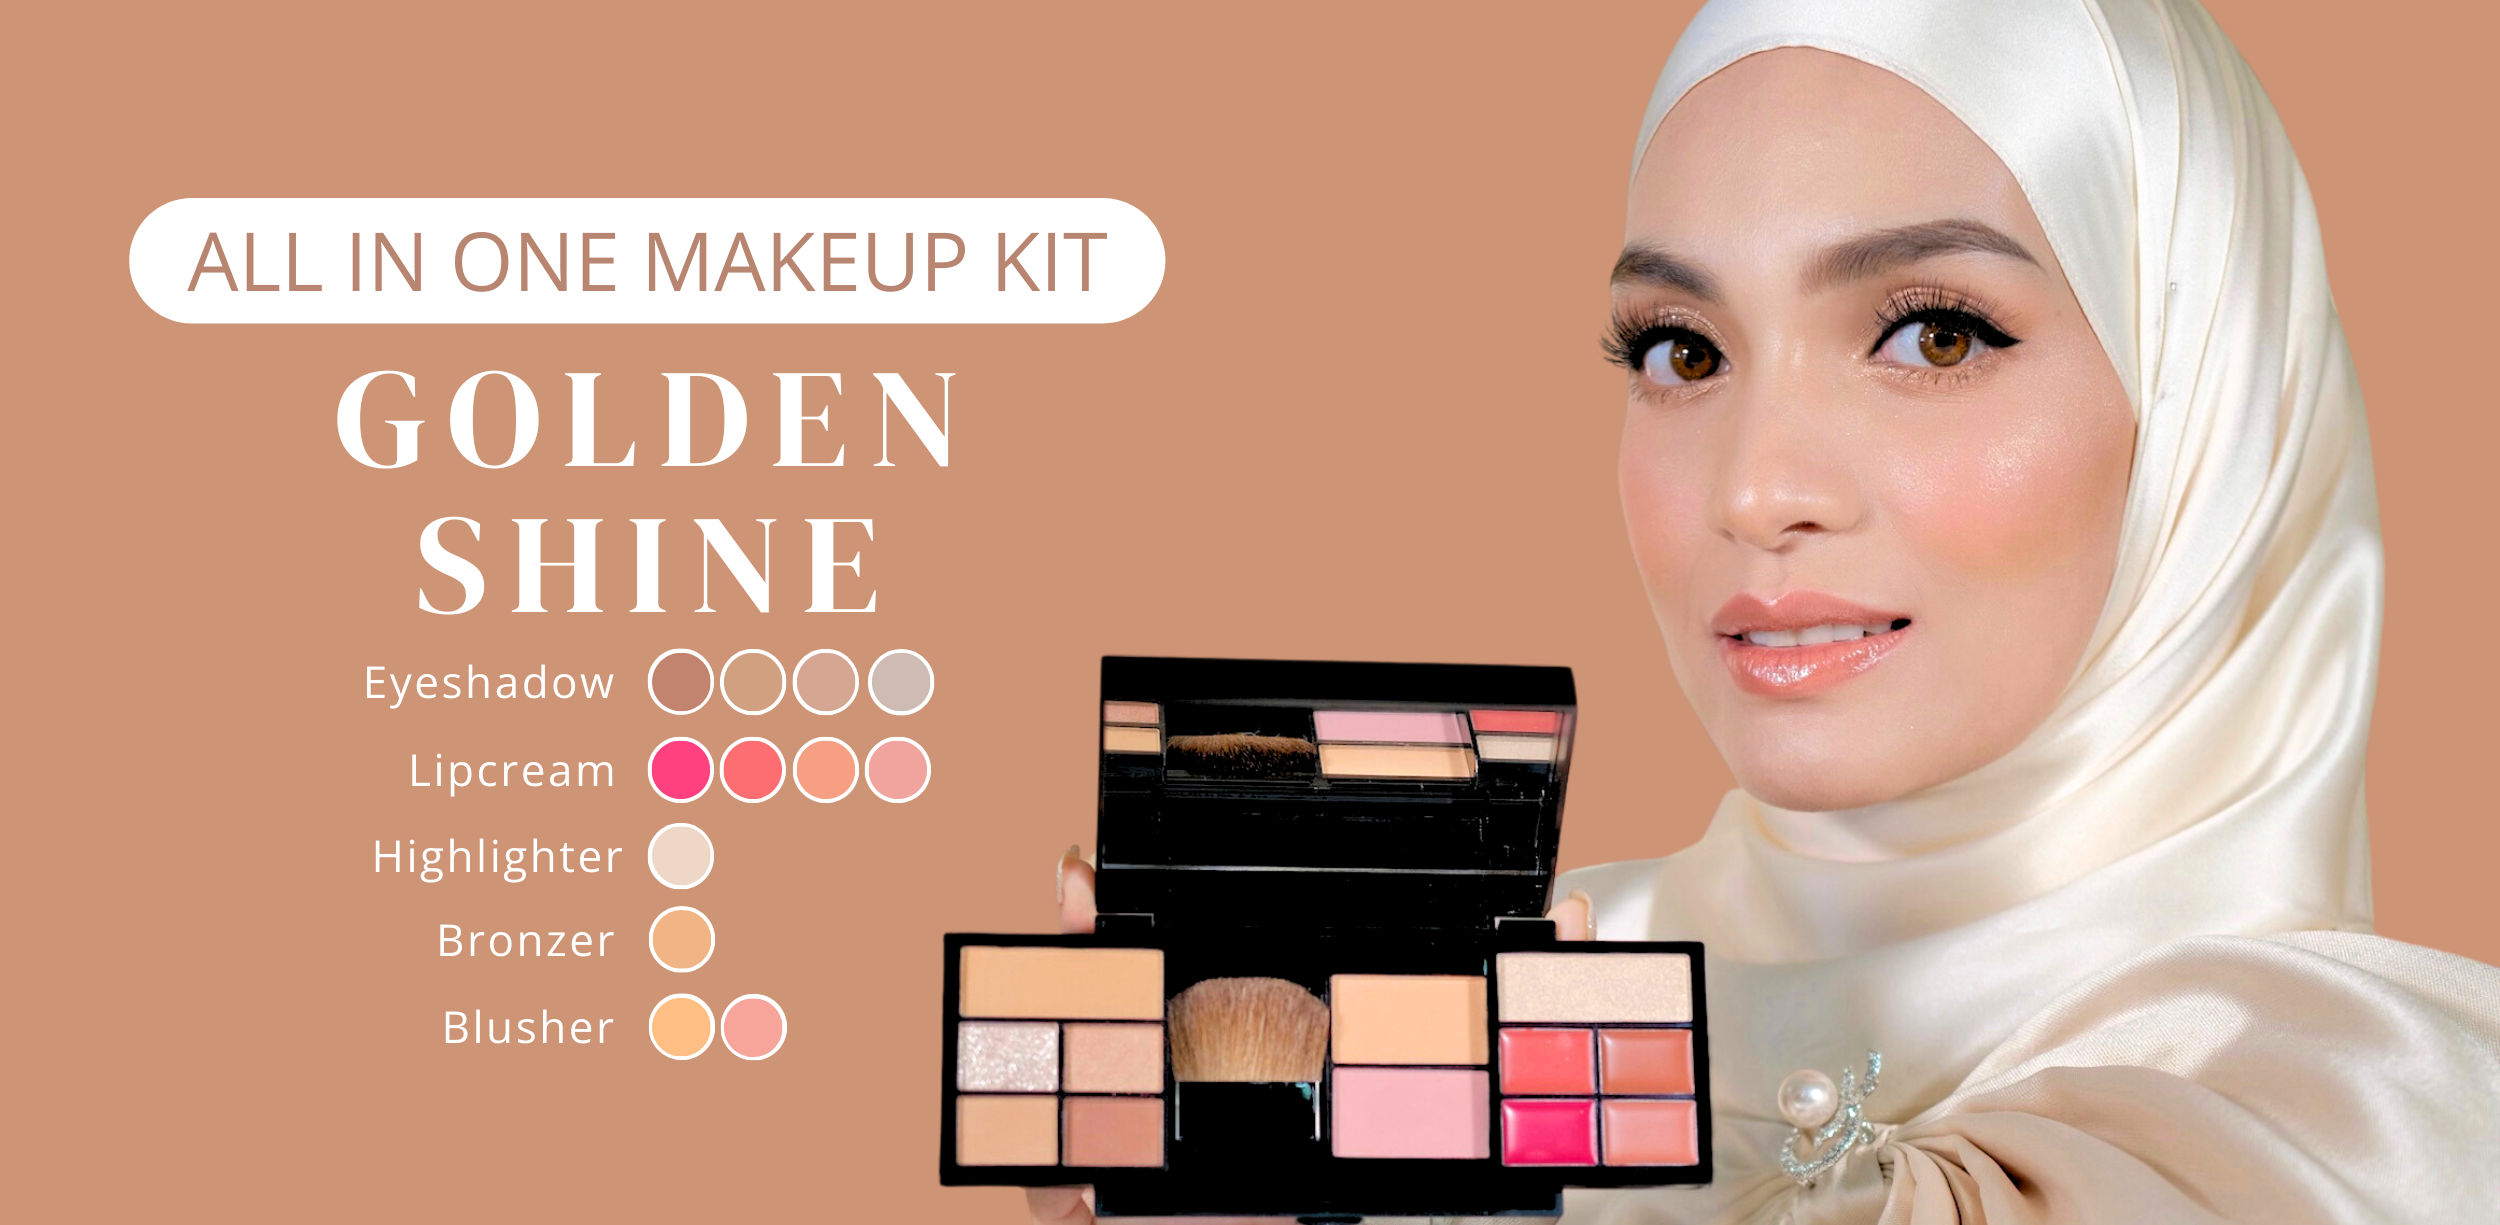 All in One Makeup kit